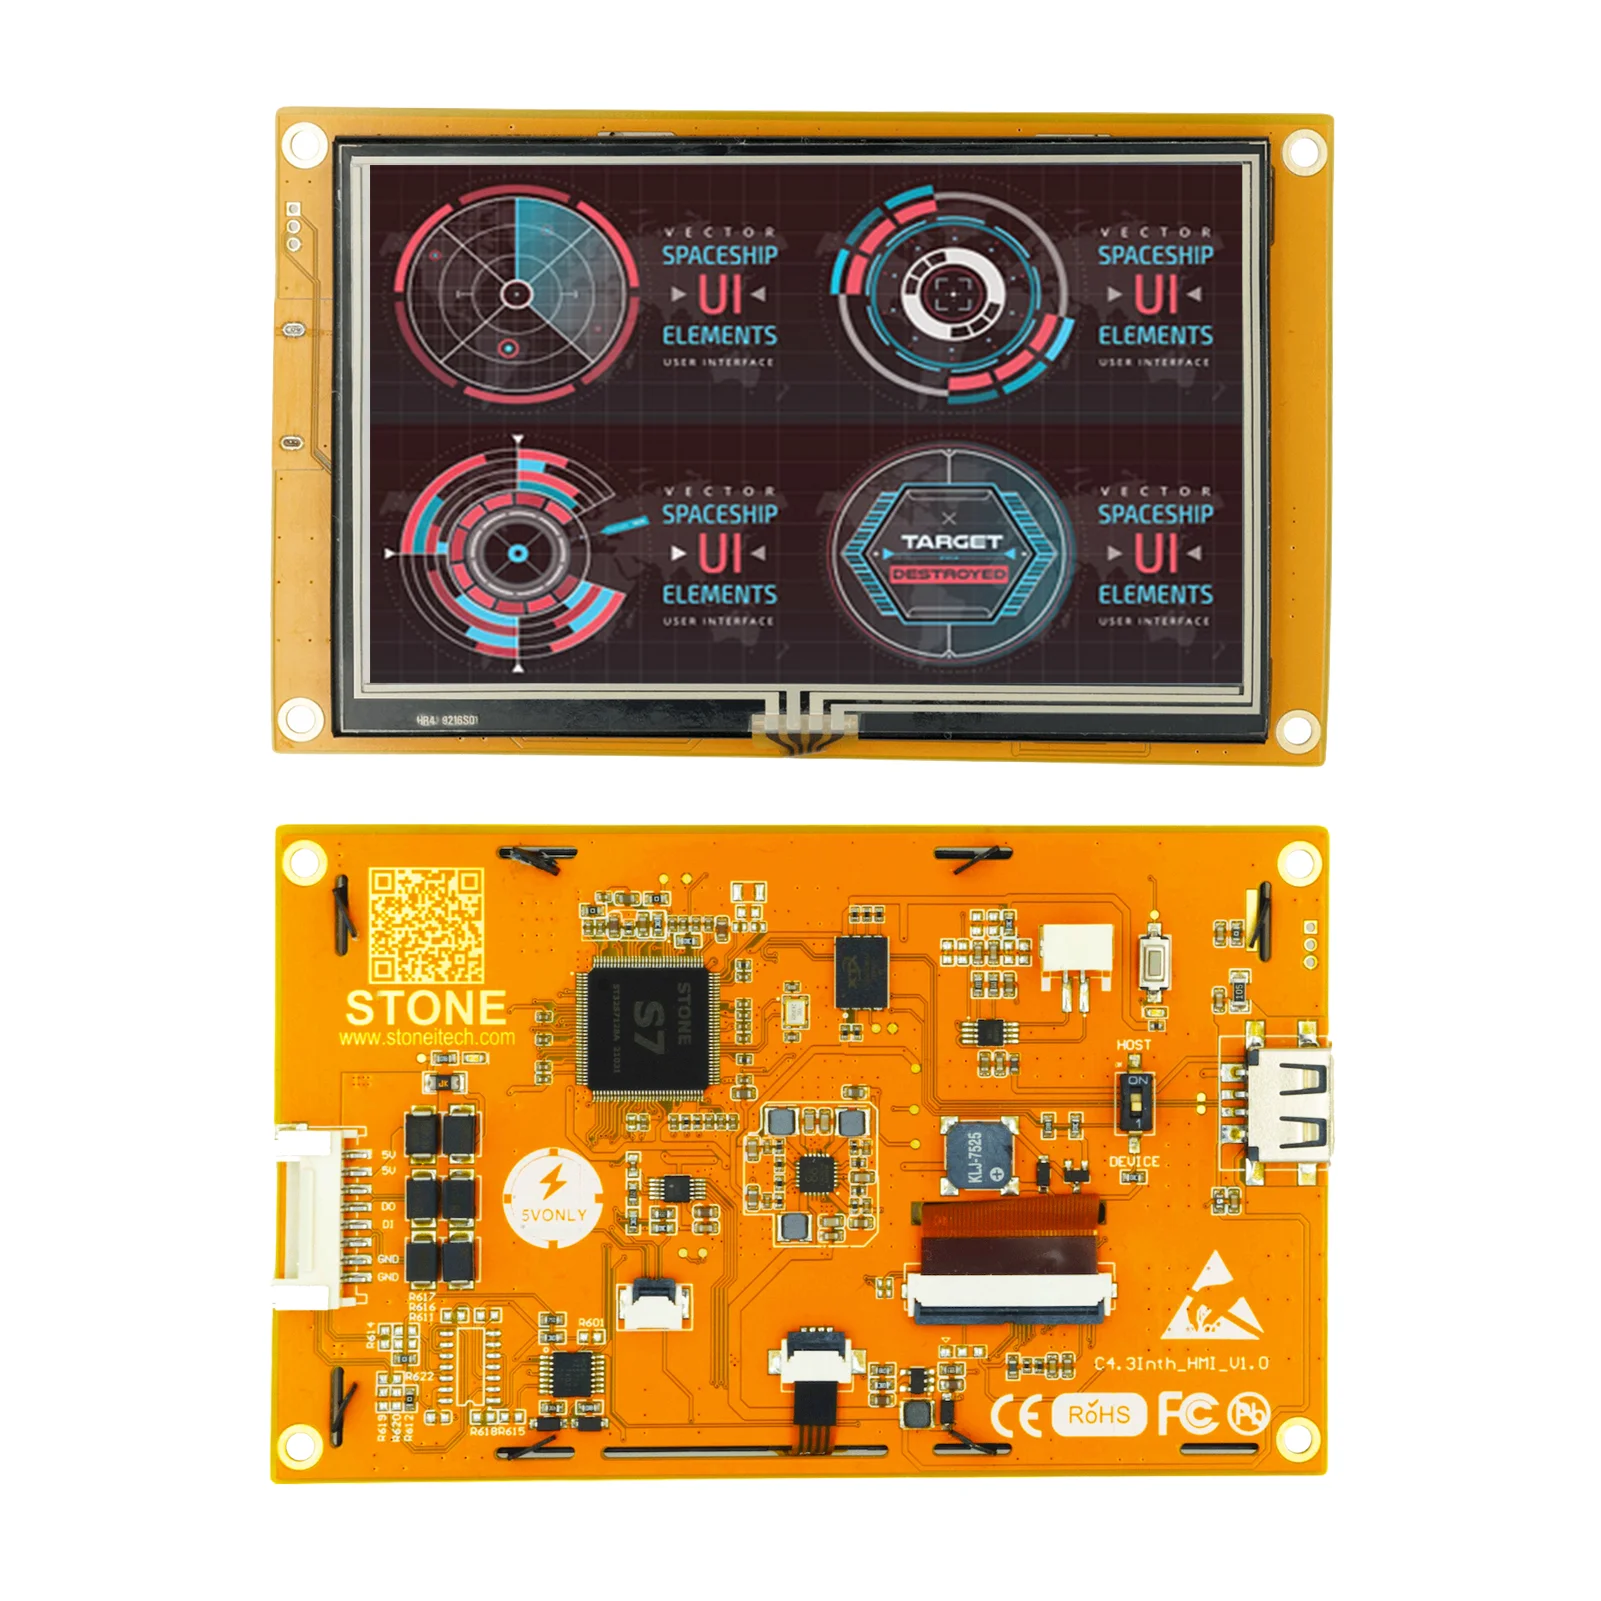 SCBRHMI 4.3 Inch HMI Smart TFT LCD monitor Display with Controller + Program + Touch Screen + UART Serial Interface